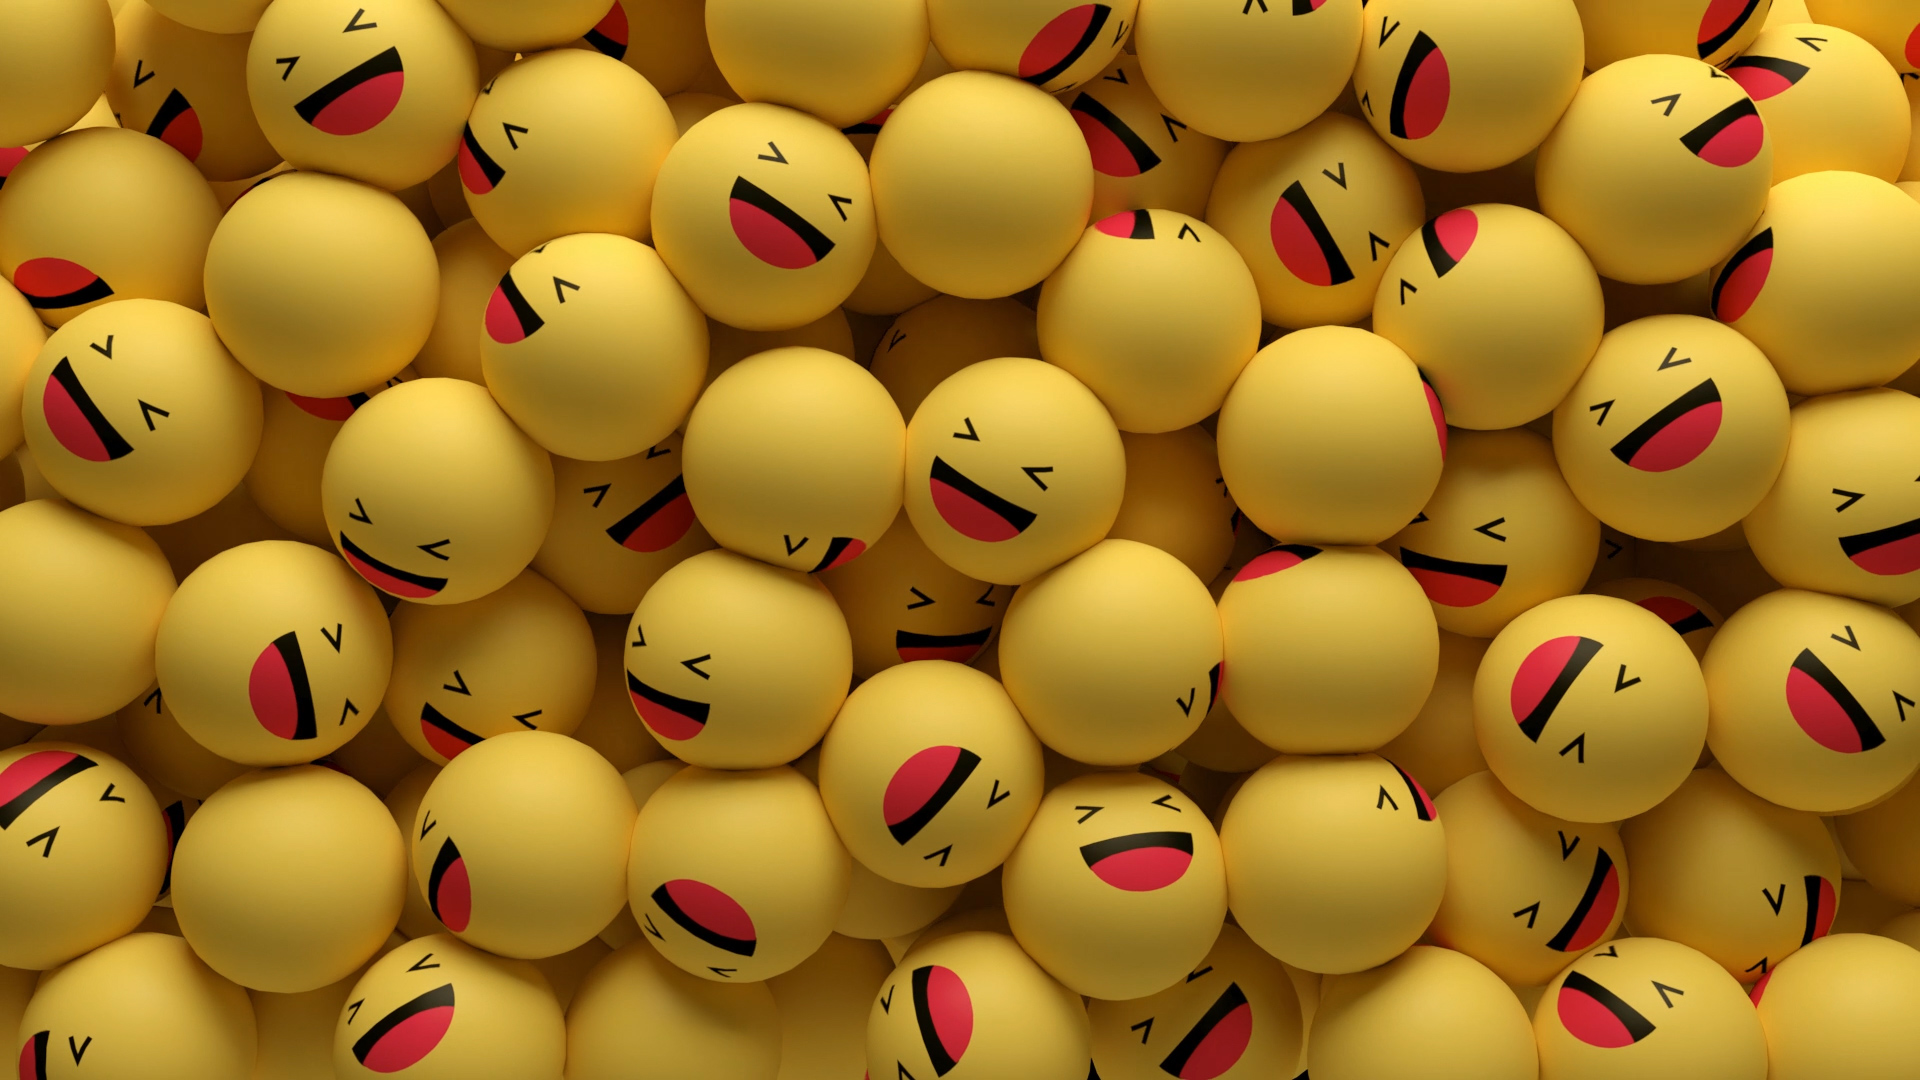 Happy Laughing Emoji 3D wallpaper, Download free amazing High Resolution backgrounds, images